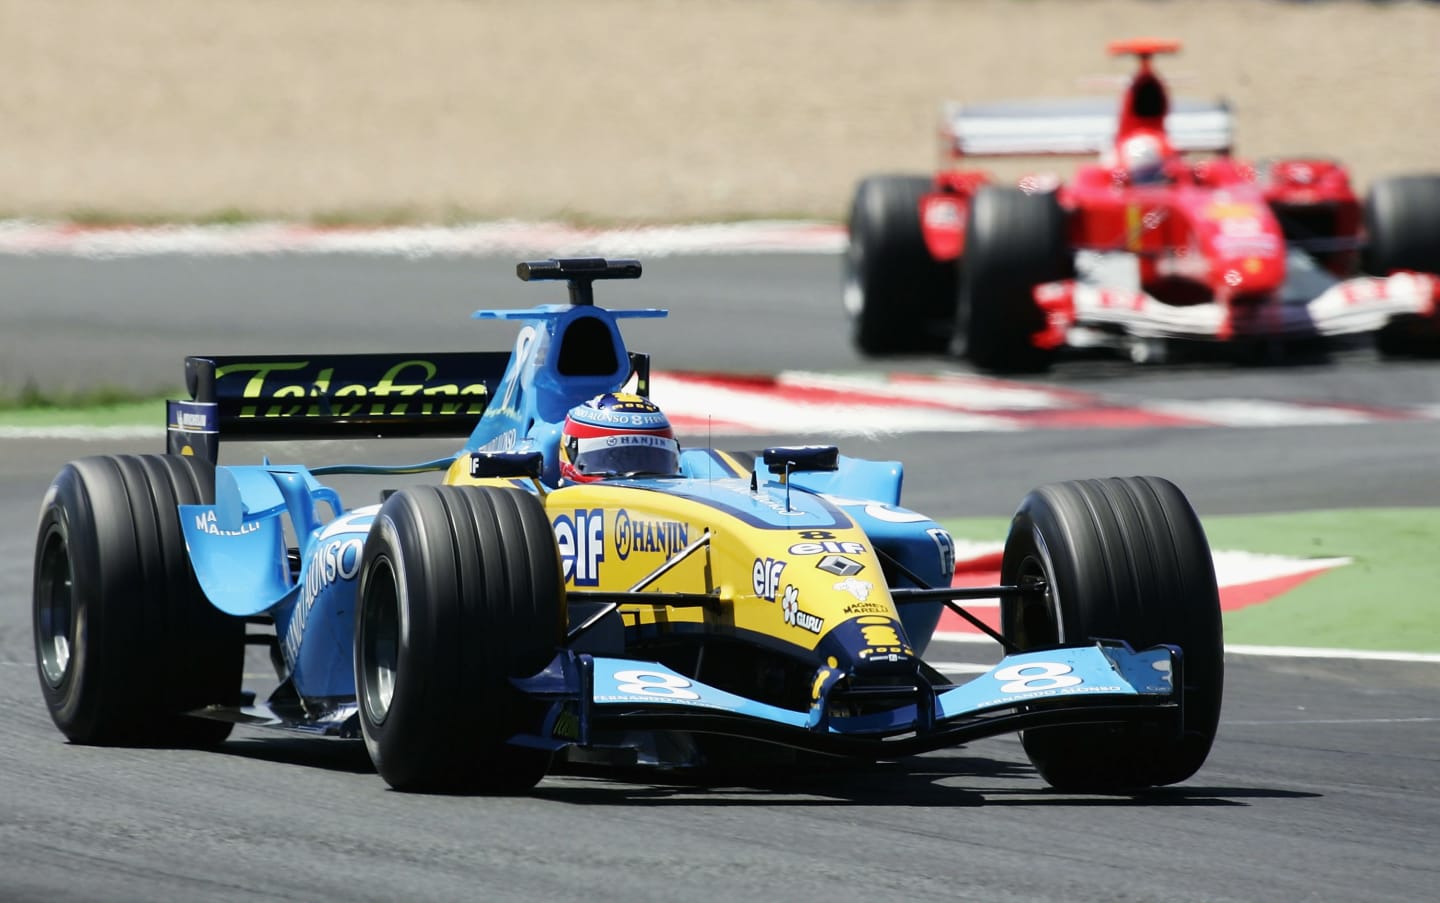 MAGNY-COURS, FRANCE - JULY 4: Fernando Alonso of Spain and Renault leads Michael Schumacher of